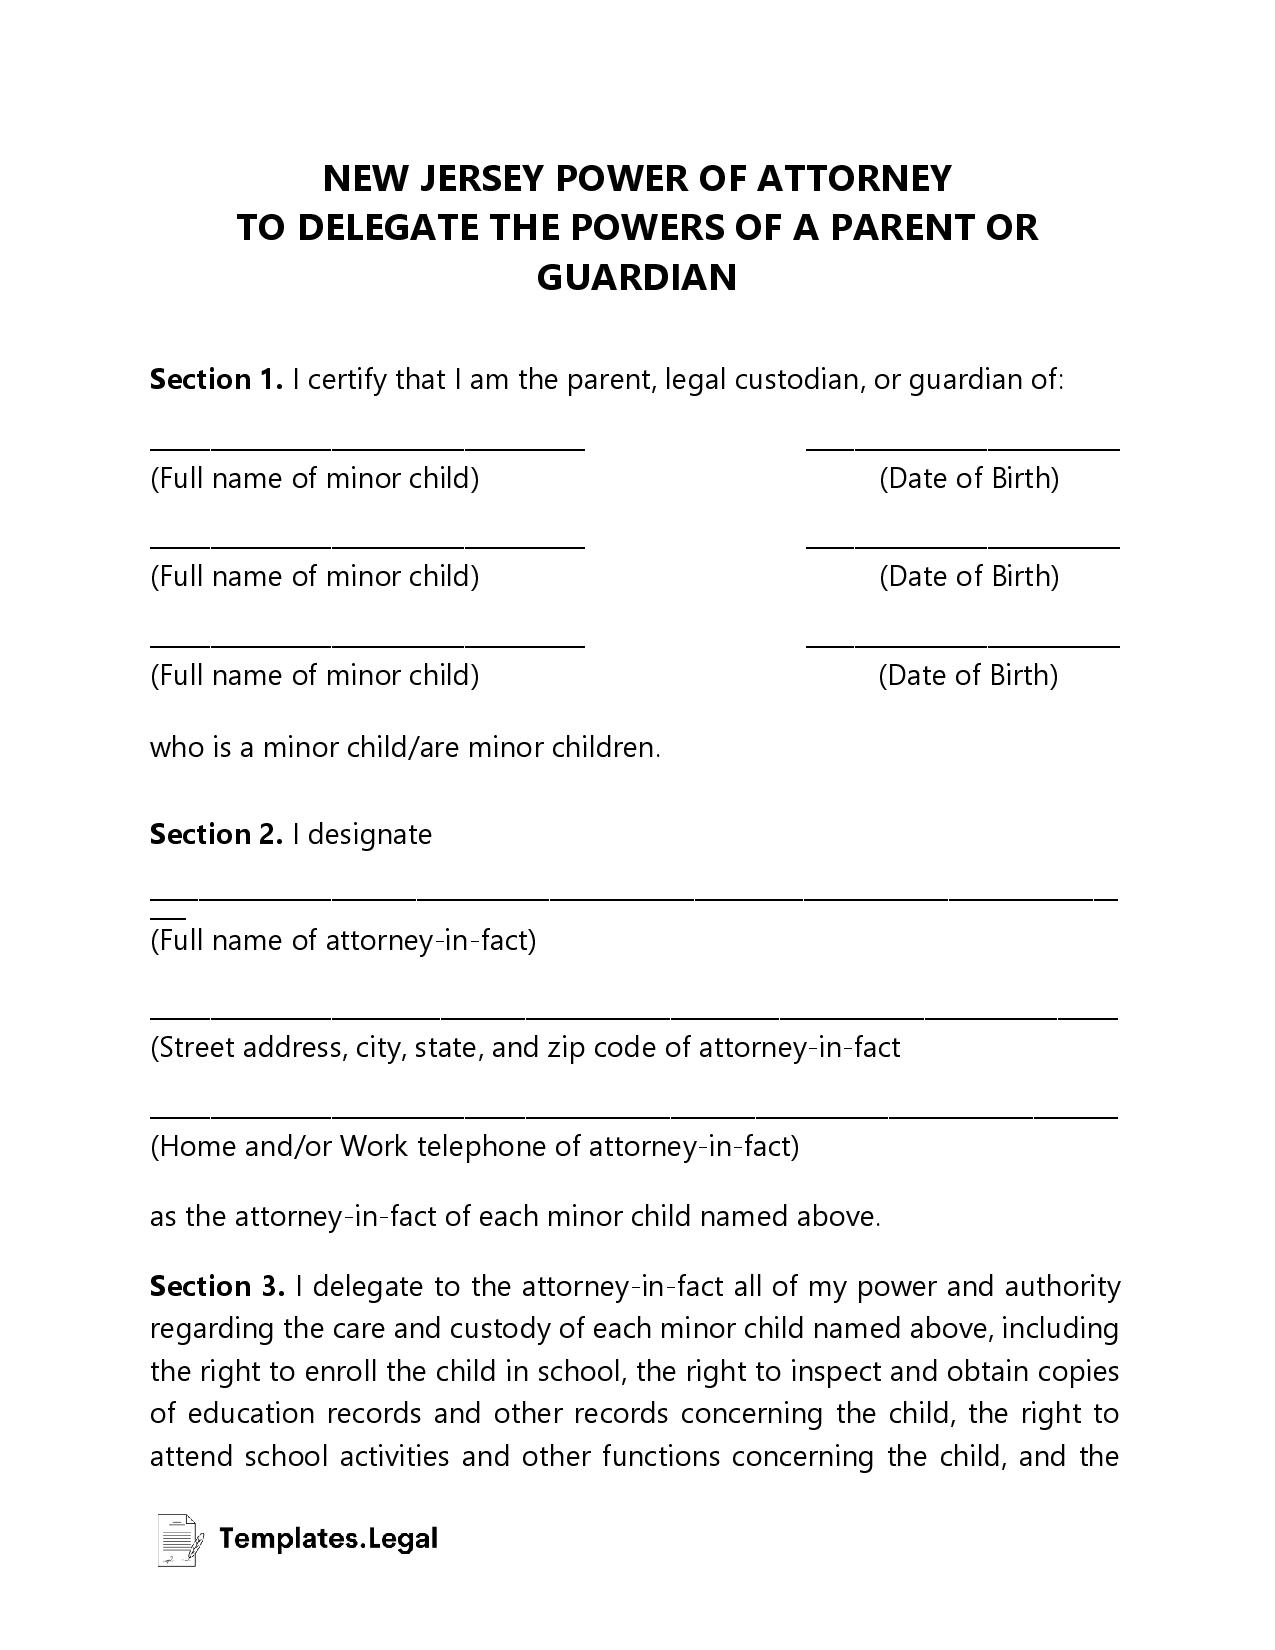 New Jersey Minor (Child) Power of Attorney - Templates.Legal